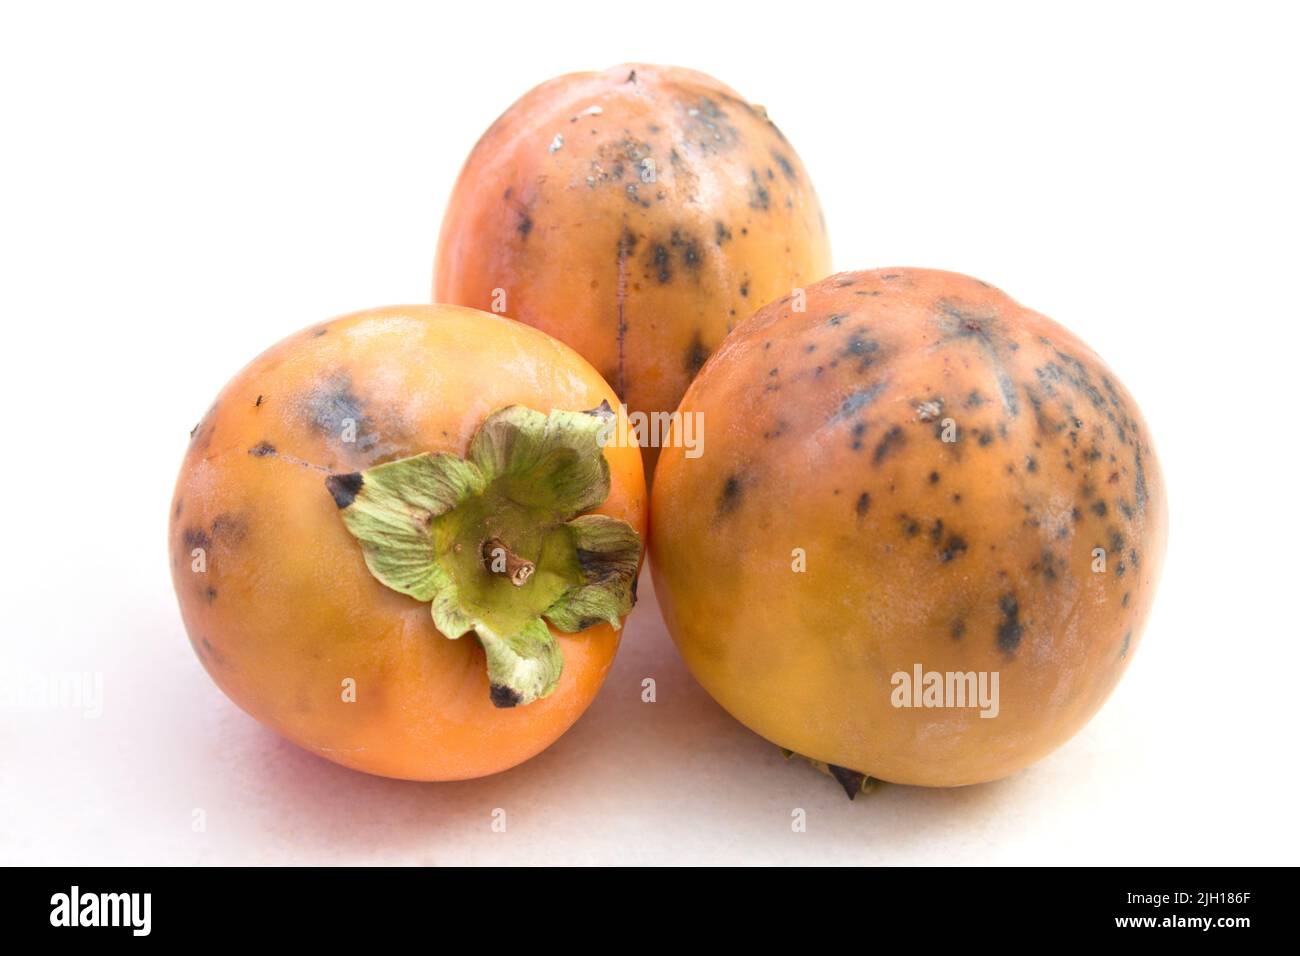 Close-up of three persimmon fruits (bright red) that have suffered a hail storm on neutral background with copy space Stock Photo